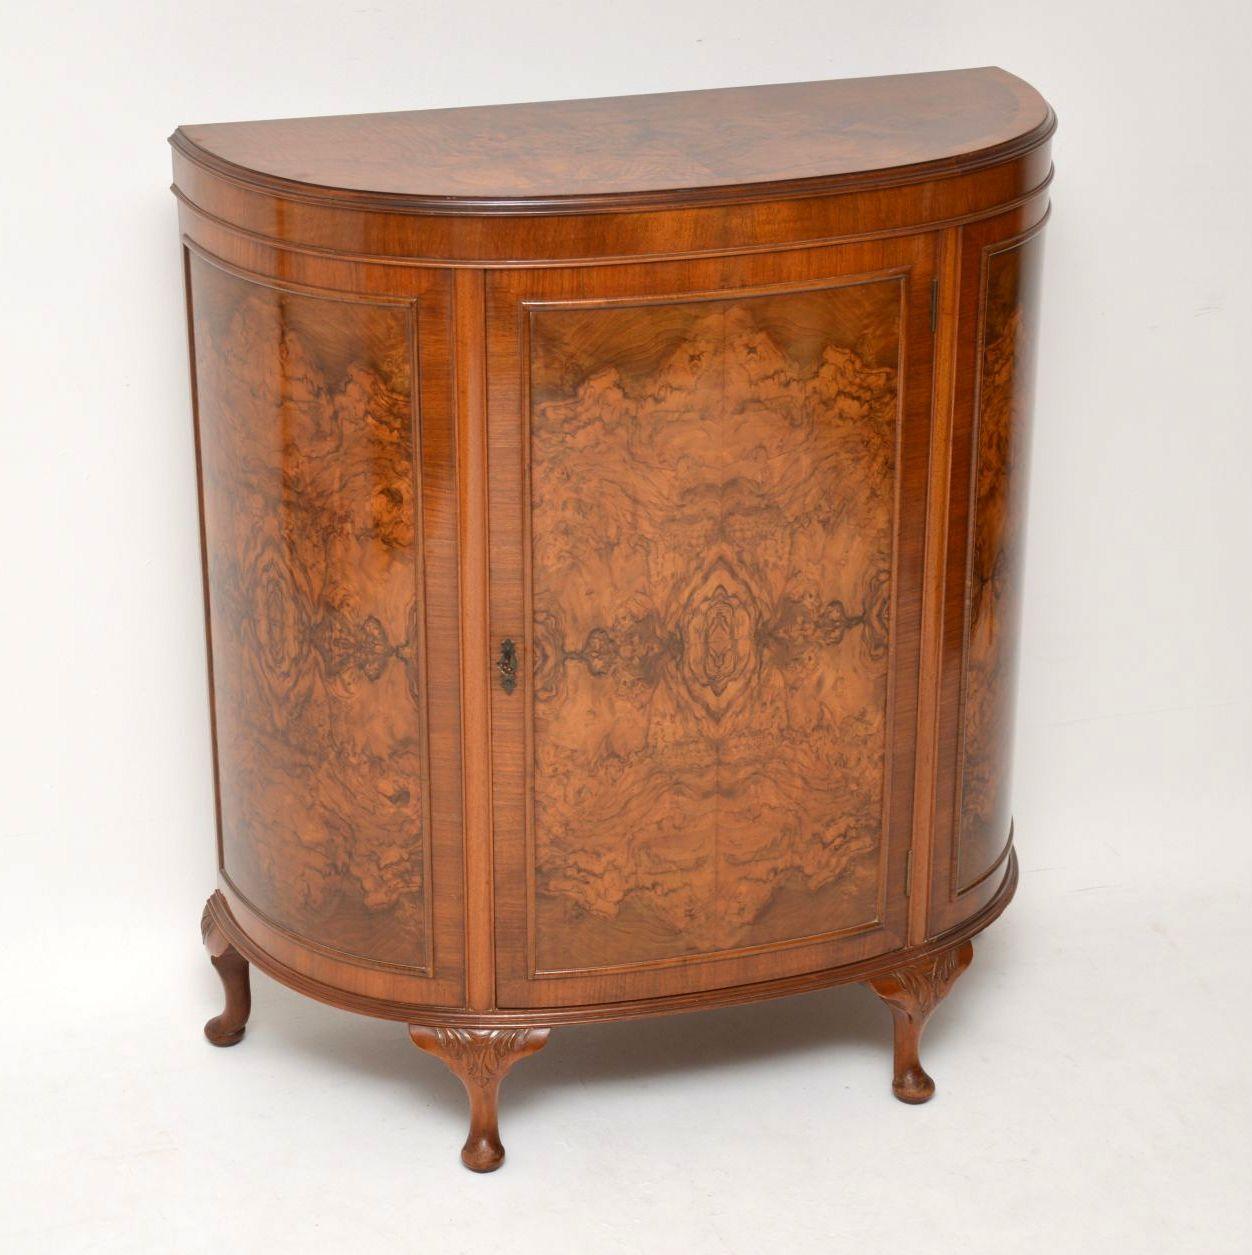 Very useful antique walnut bow fronted cabinet with plenty of storage inside & at the same time, taking up no more room than a small console side table. It has a burr walnut top & three burr walnut panels on the front, one of which is on the door.